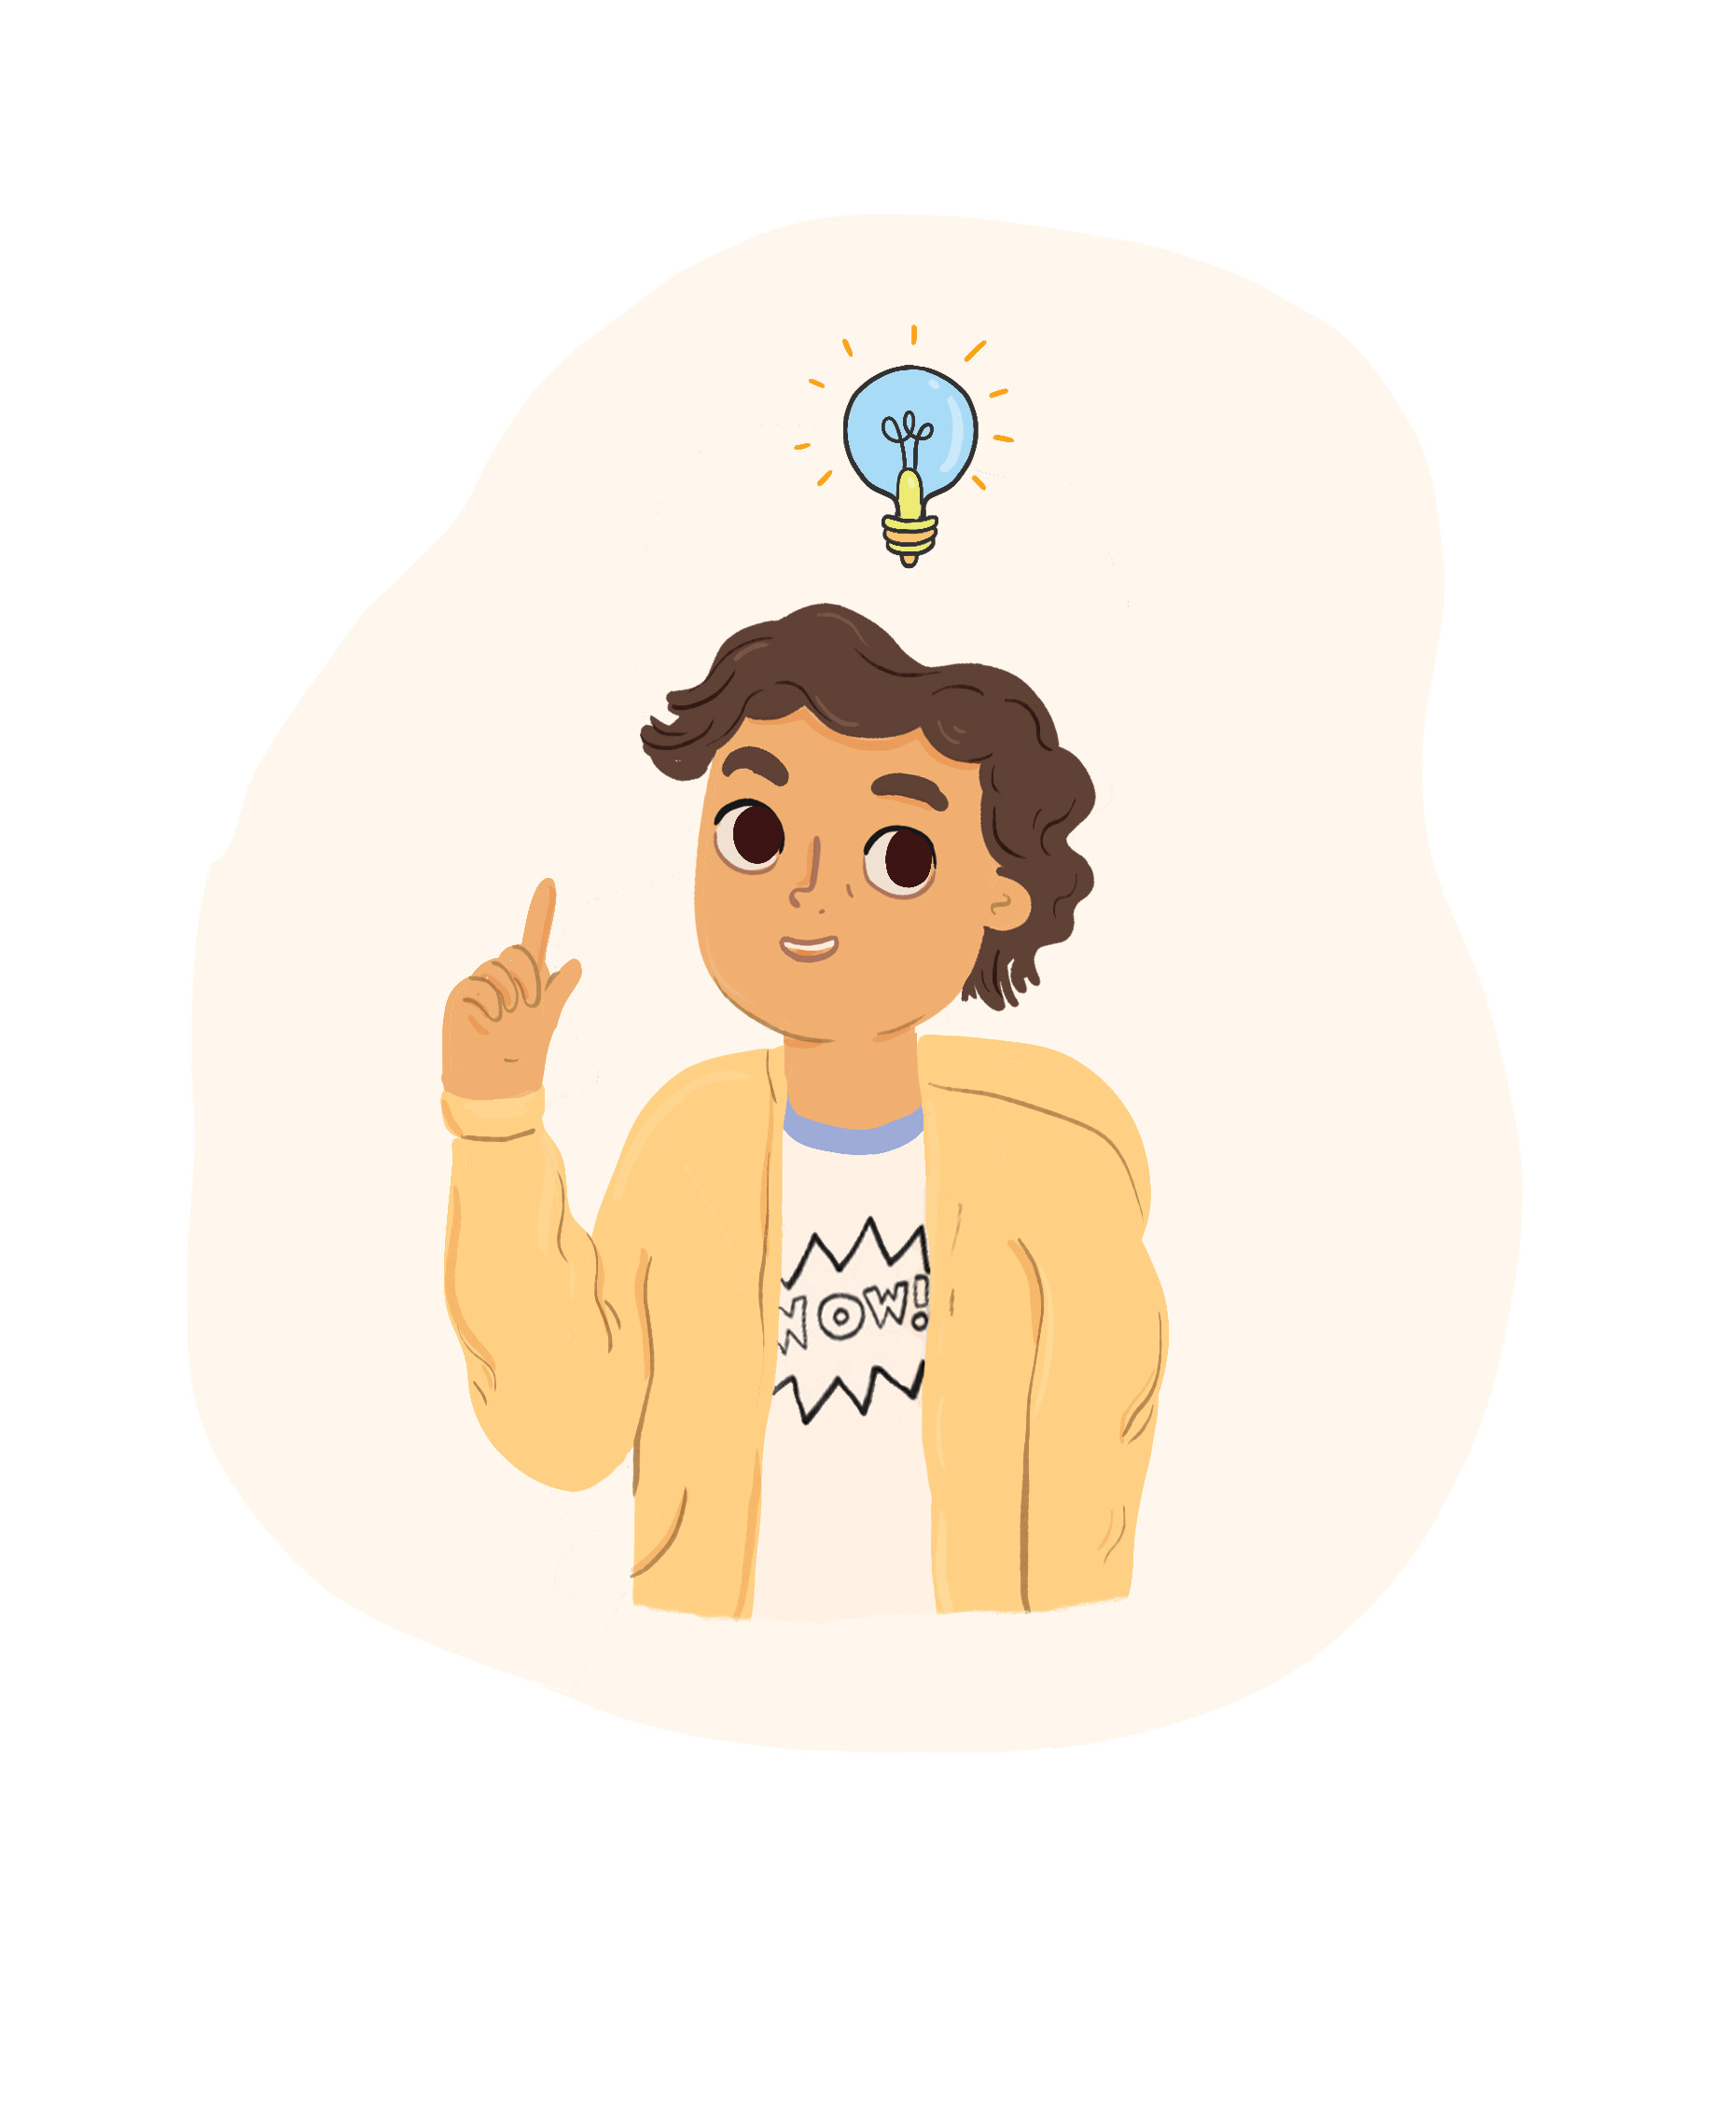 Luis looking excited, a lightbulb, representing a great idea, is hovering over his head